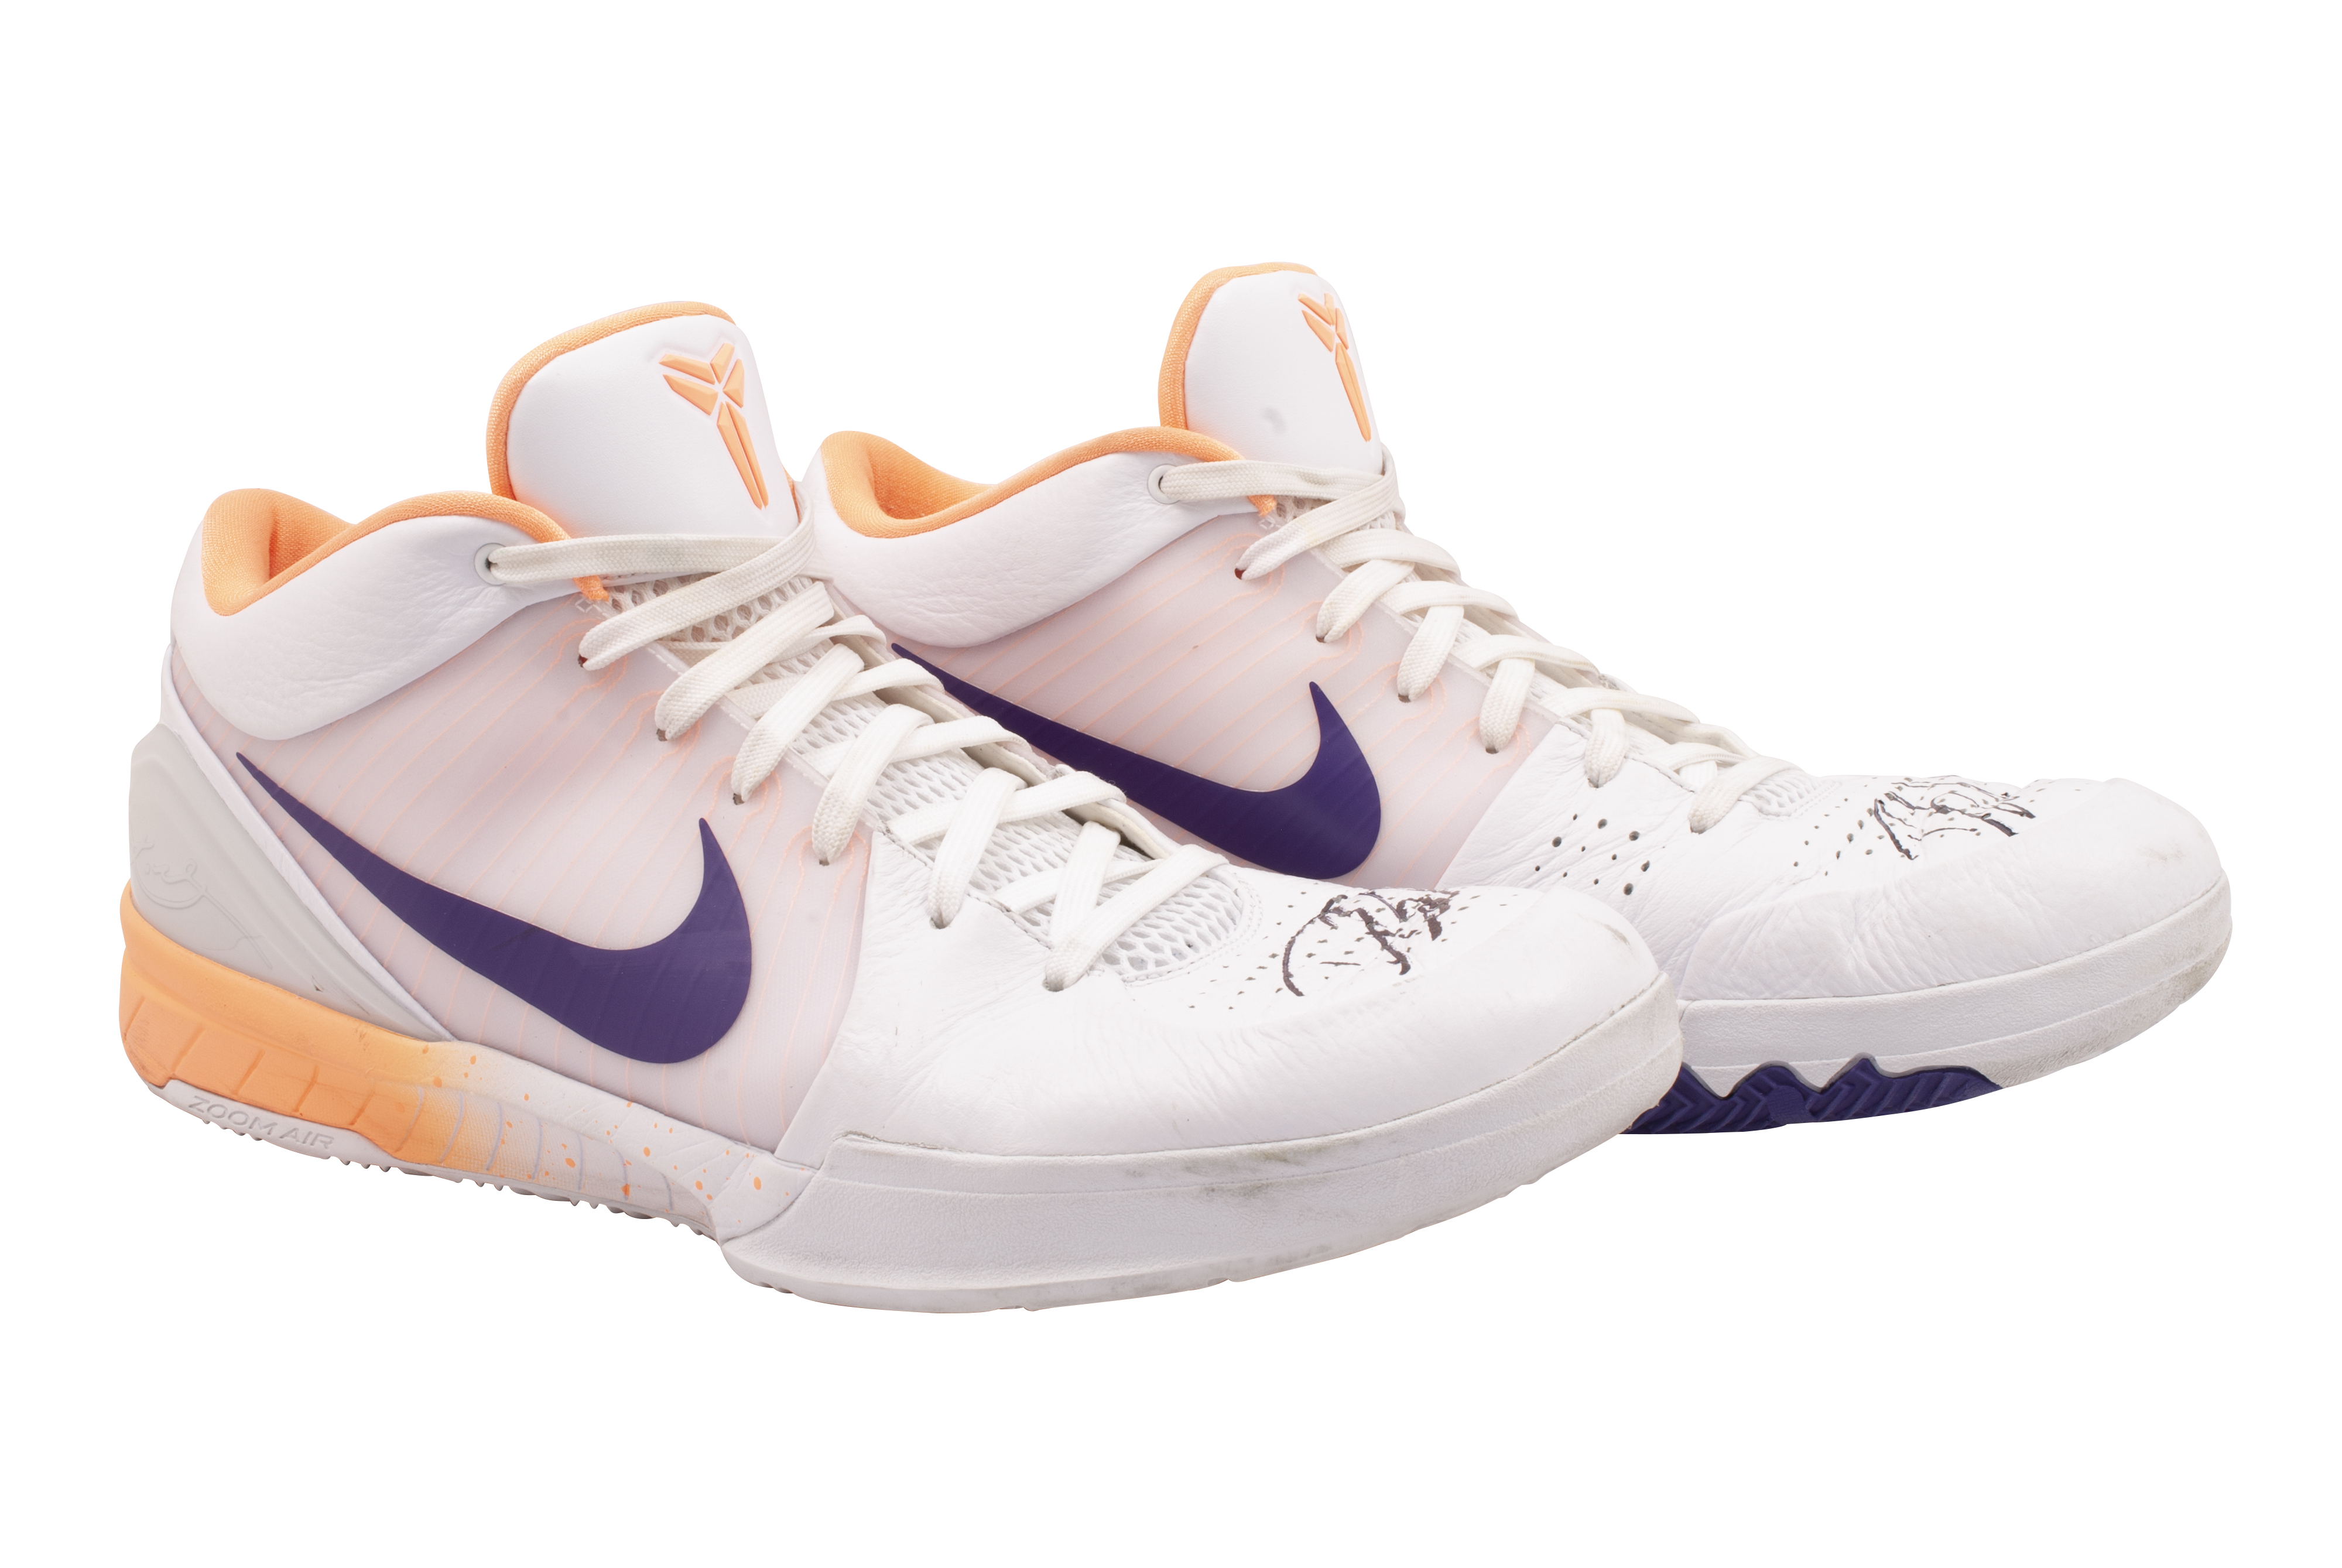 A detail view of the shoes worn by Phoenix Suns guard Devin Booker